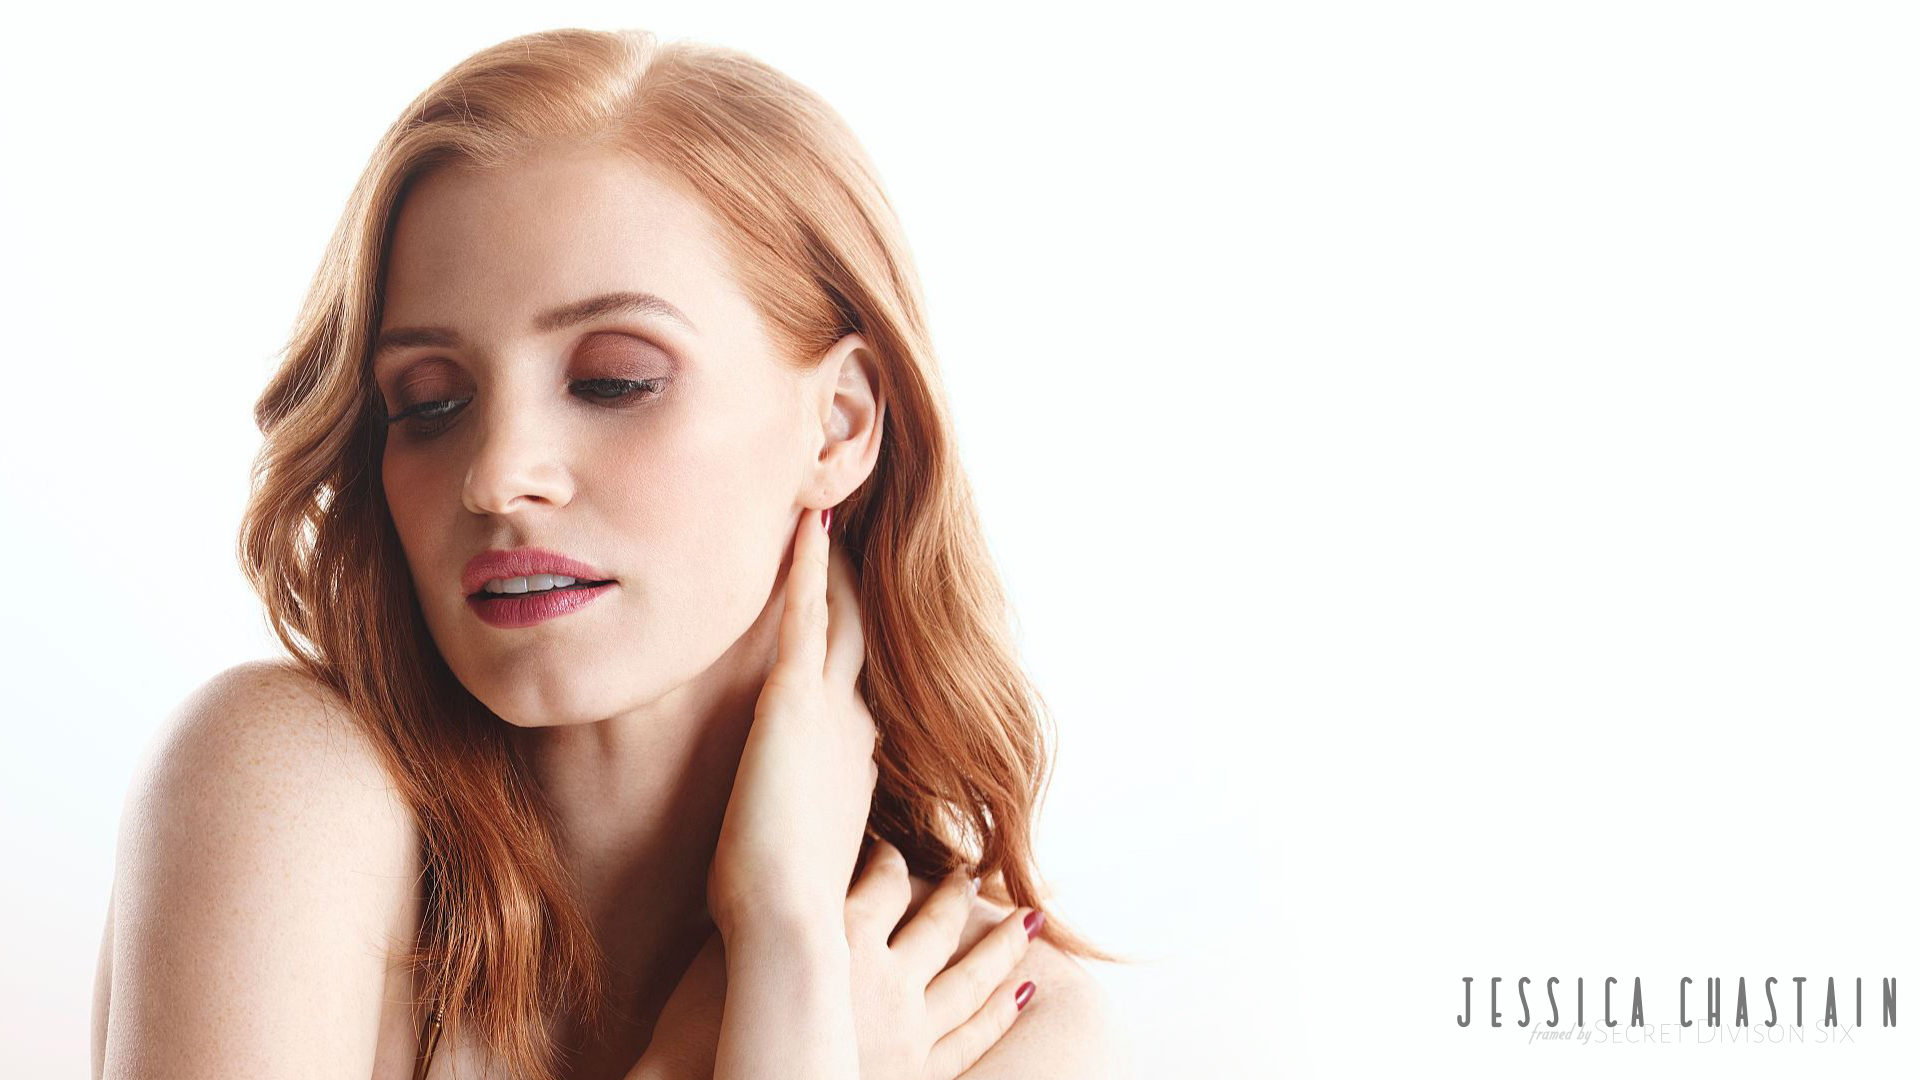 Secret Division Six Women Jessica Chastain Redhead Simple Background Actress 1920x1080